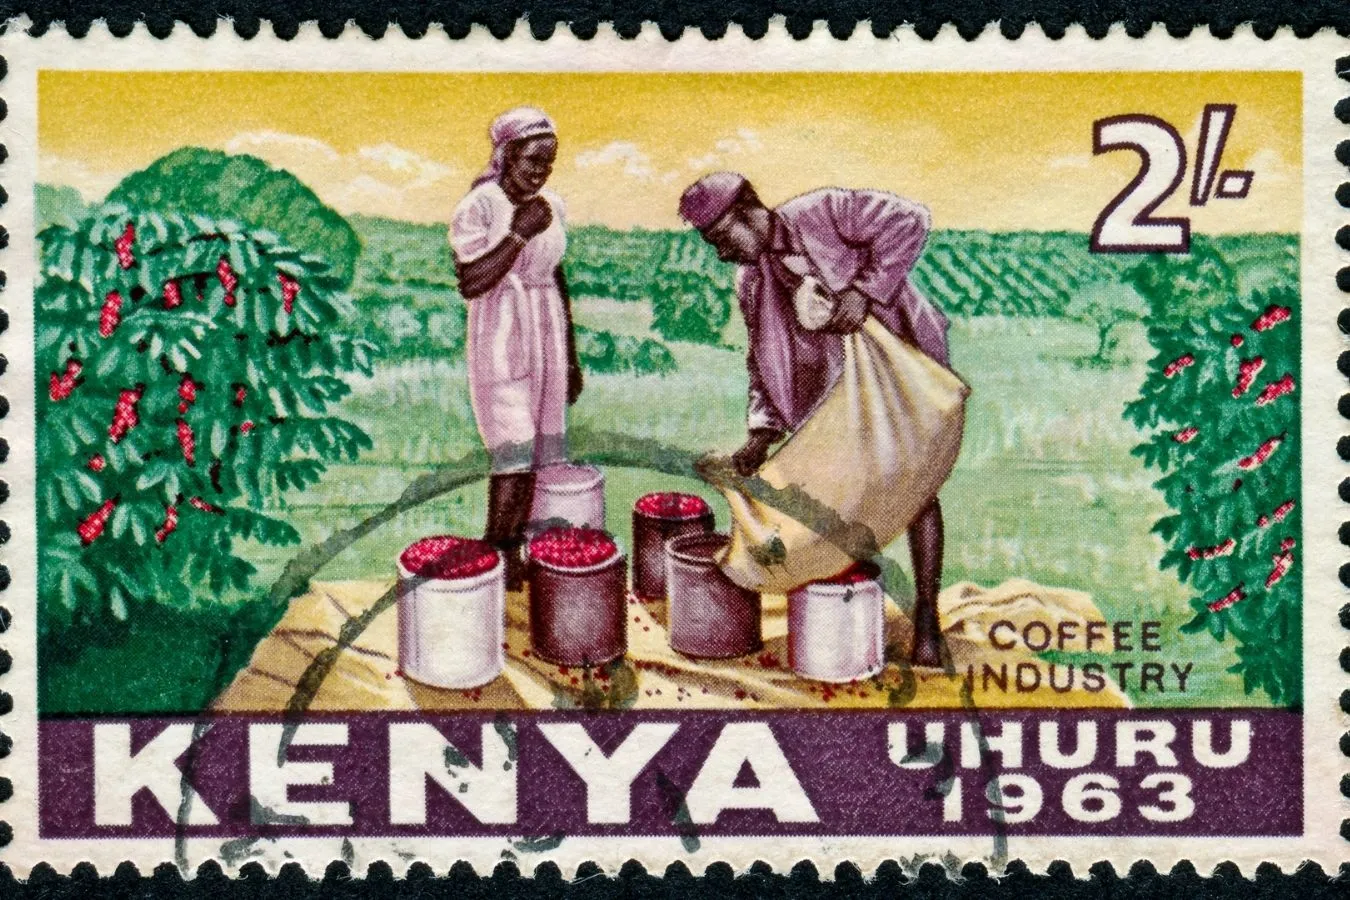 What Flavor Does Kenyan Coffee Have